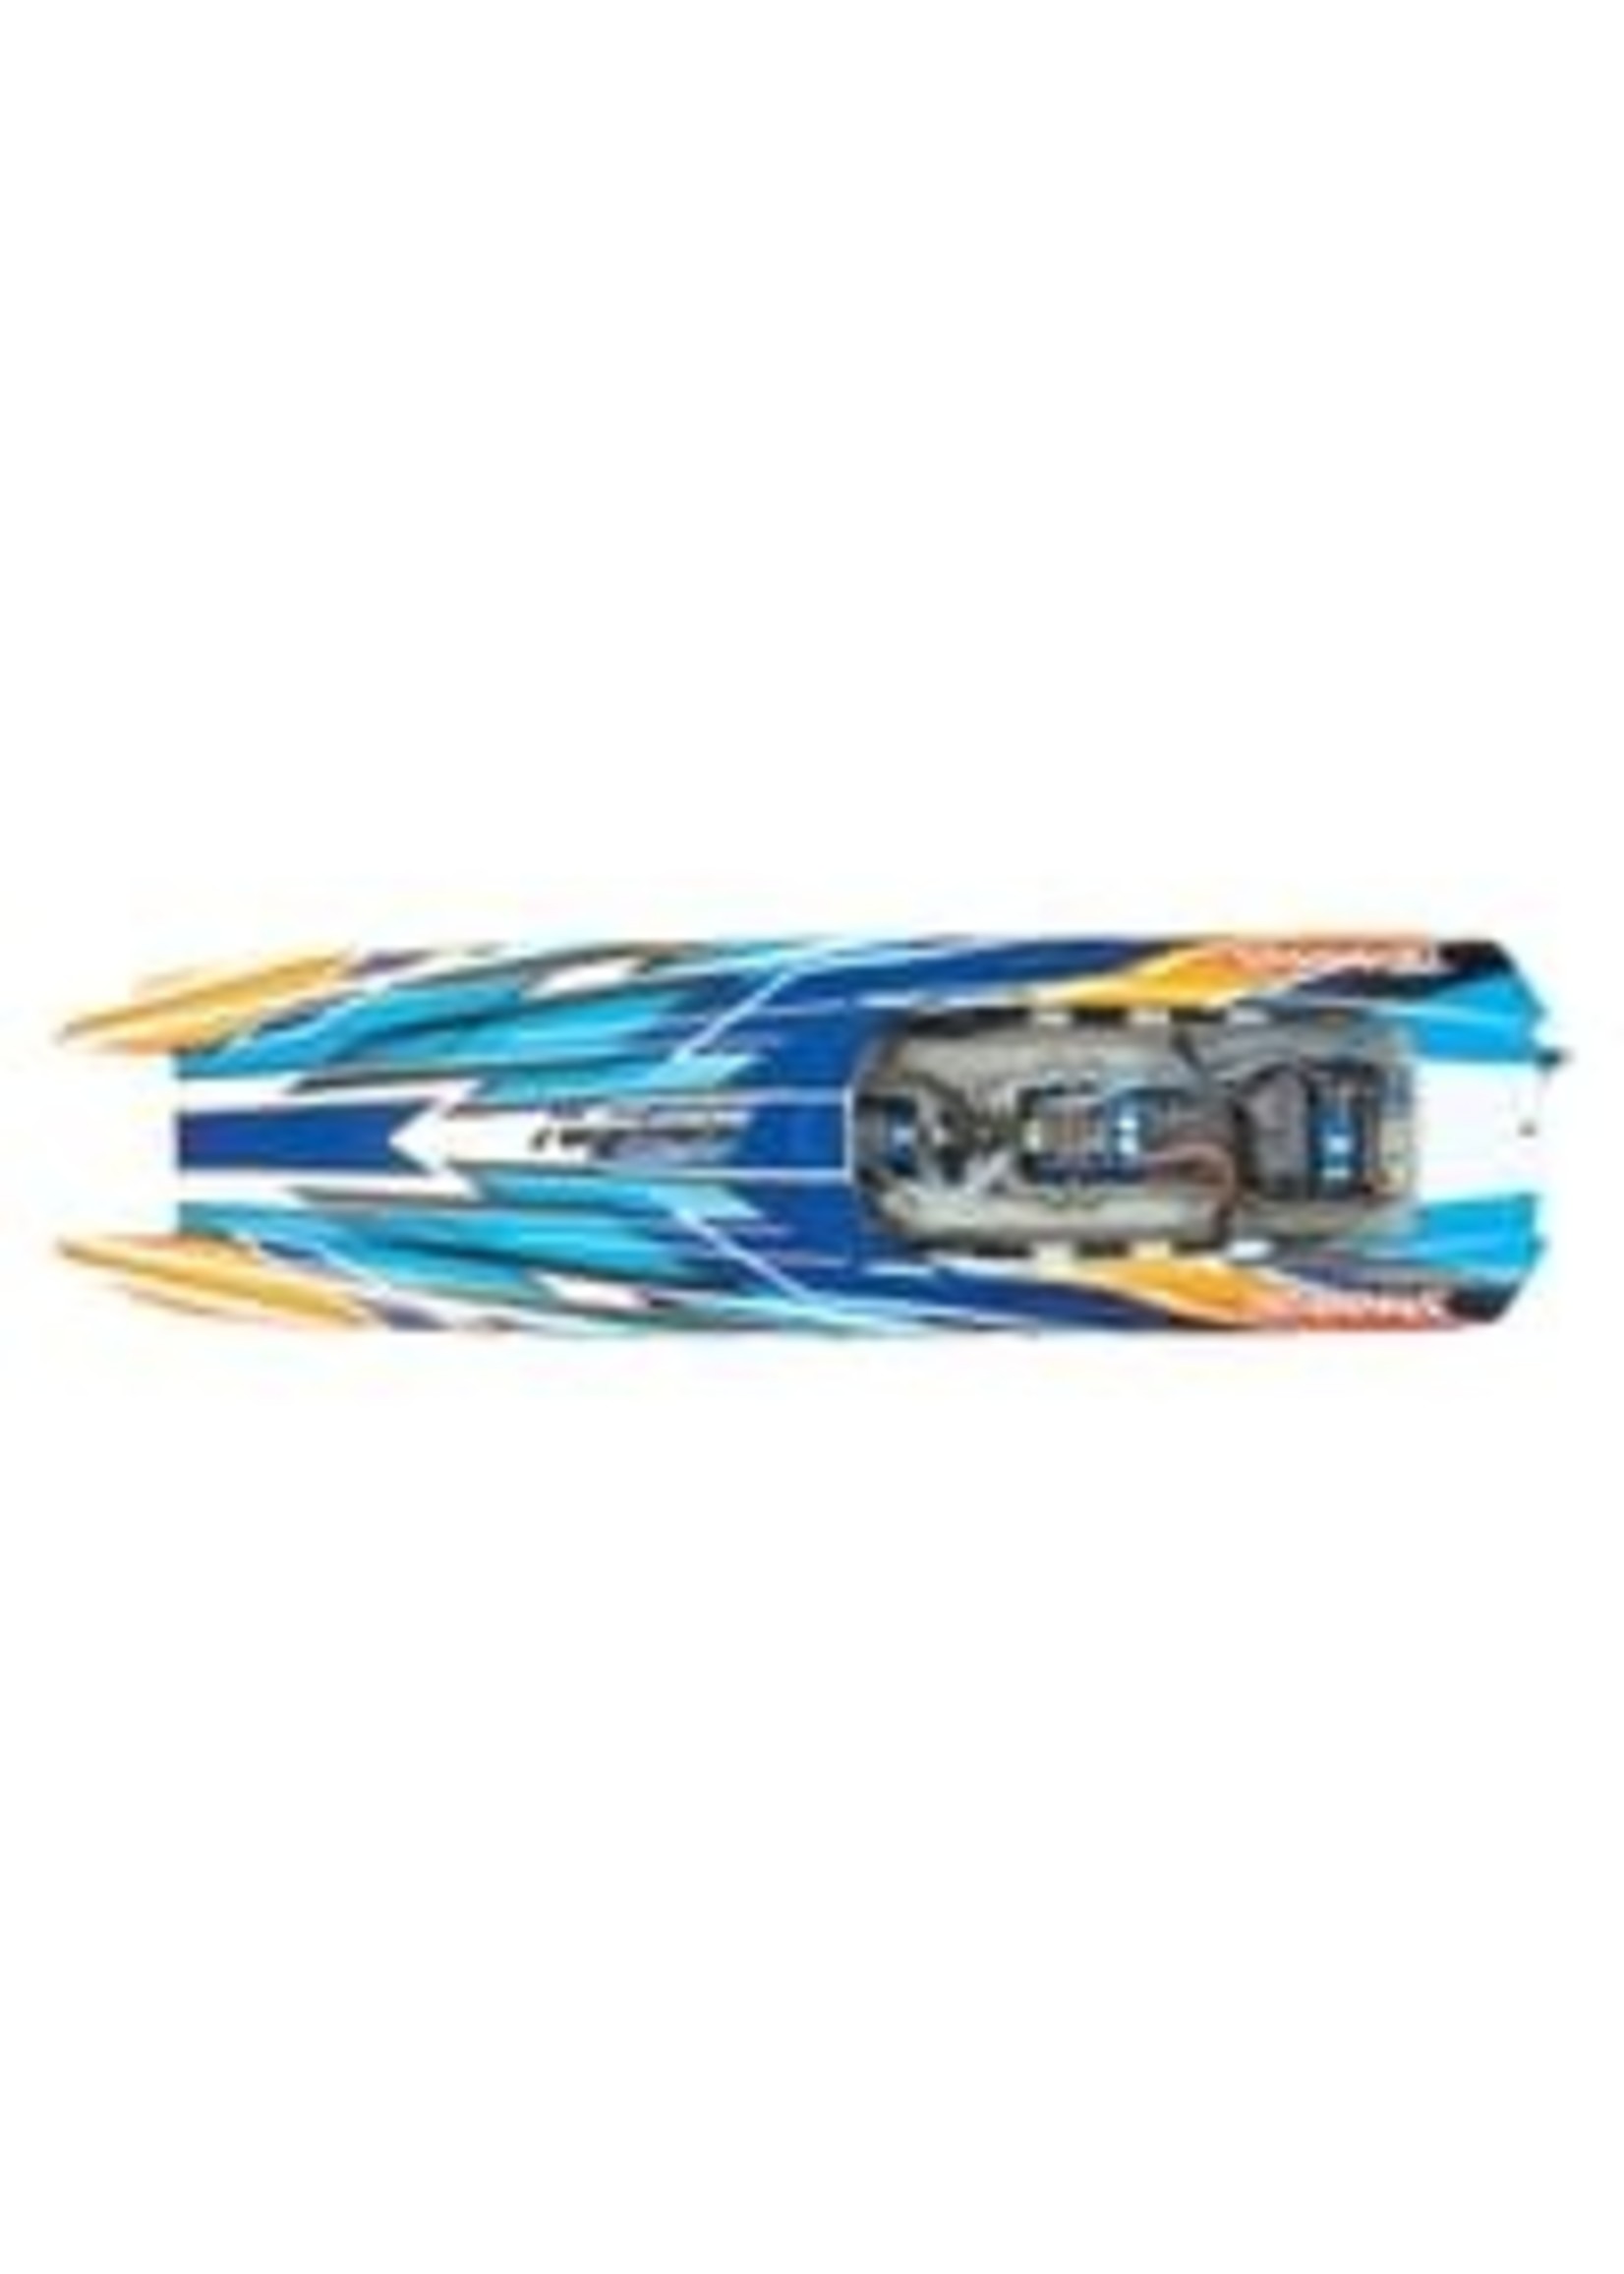 Traxxas 57046-4-ORNGX DCB M41 Widebody: Brushless 40' Race Boat with TQi Traxxas Link  Enabled 2.4GHz Radio System & Traxxas Stability Management (TSM)